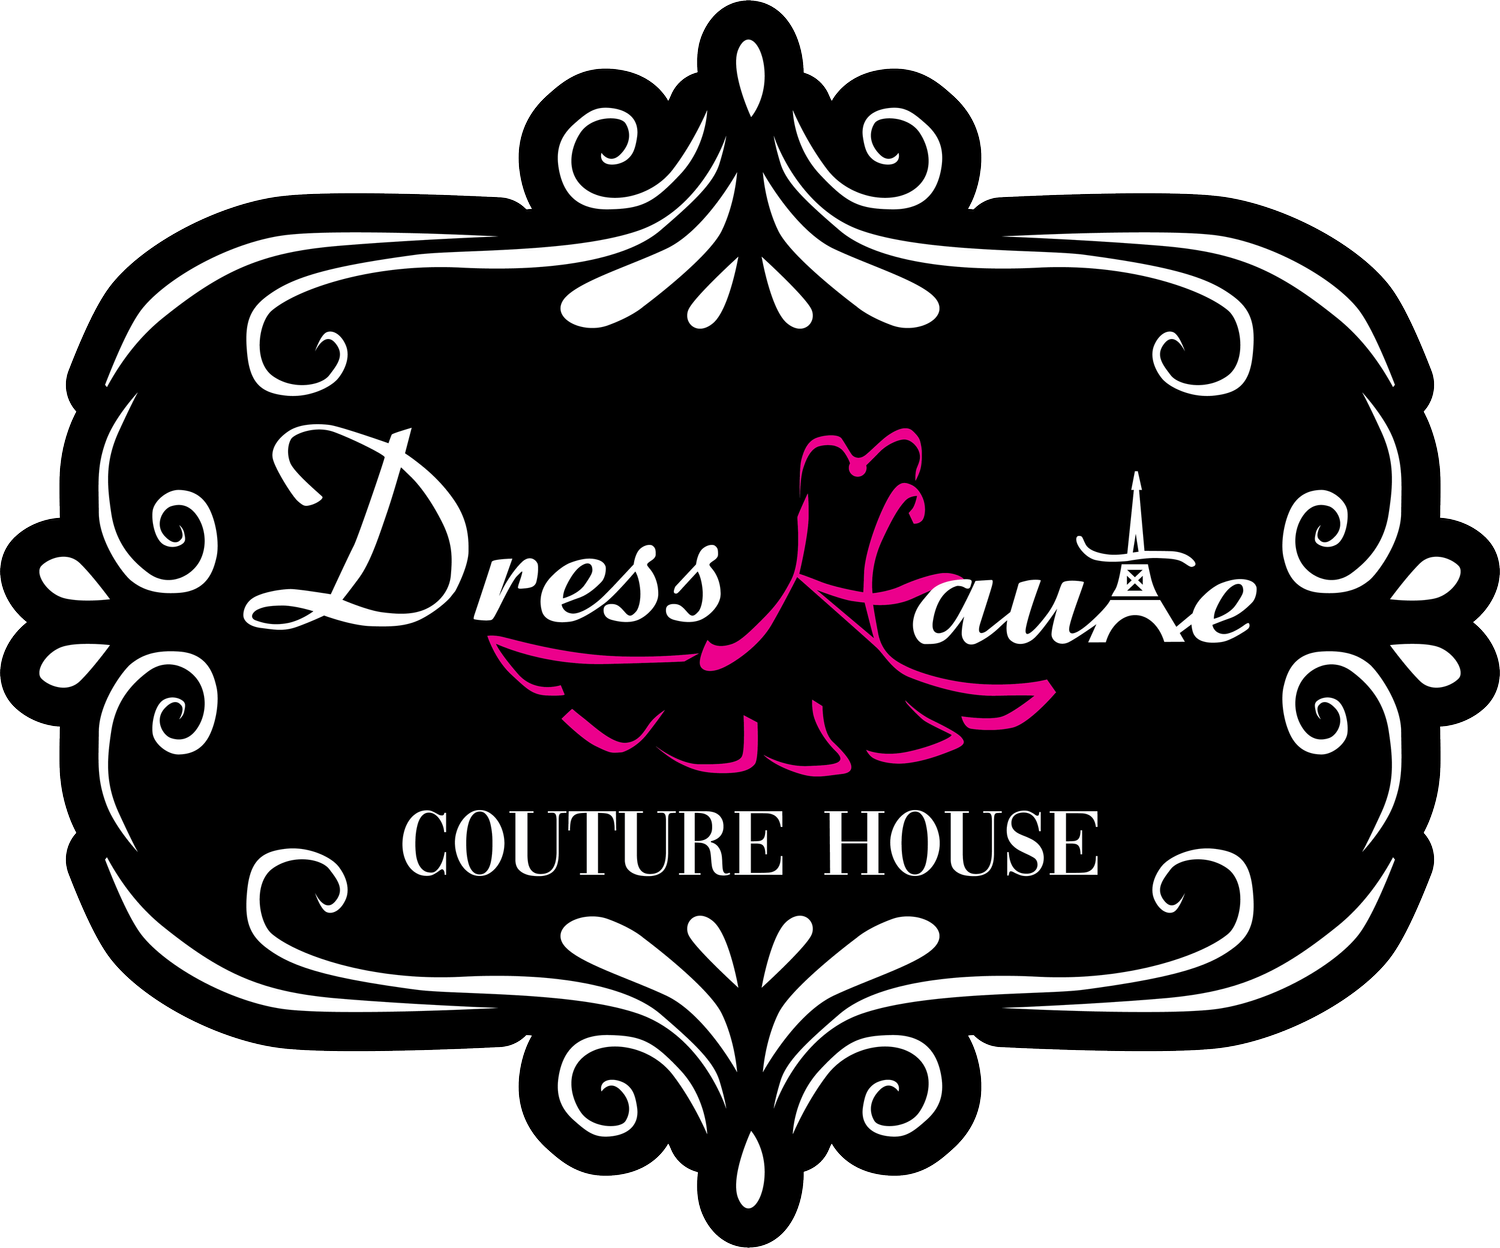 Dress Haute Couture House